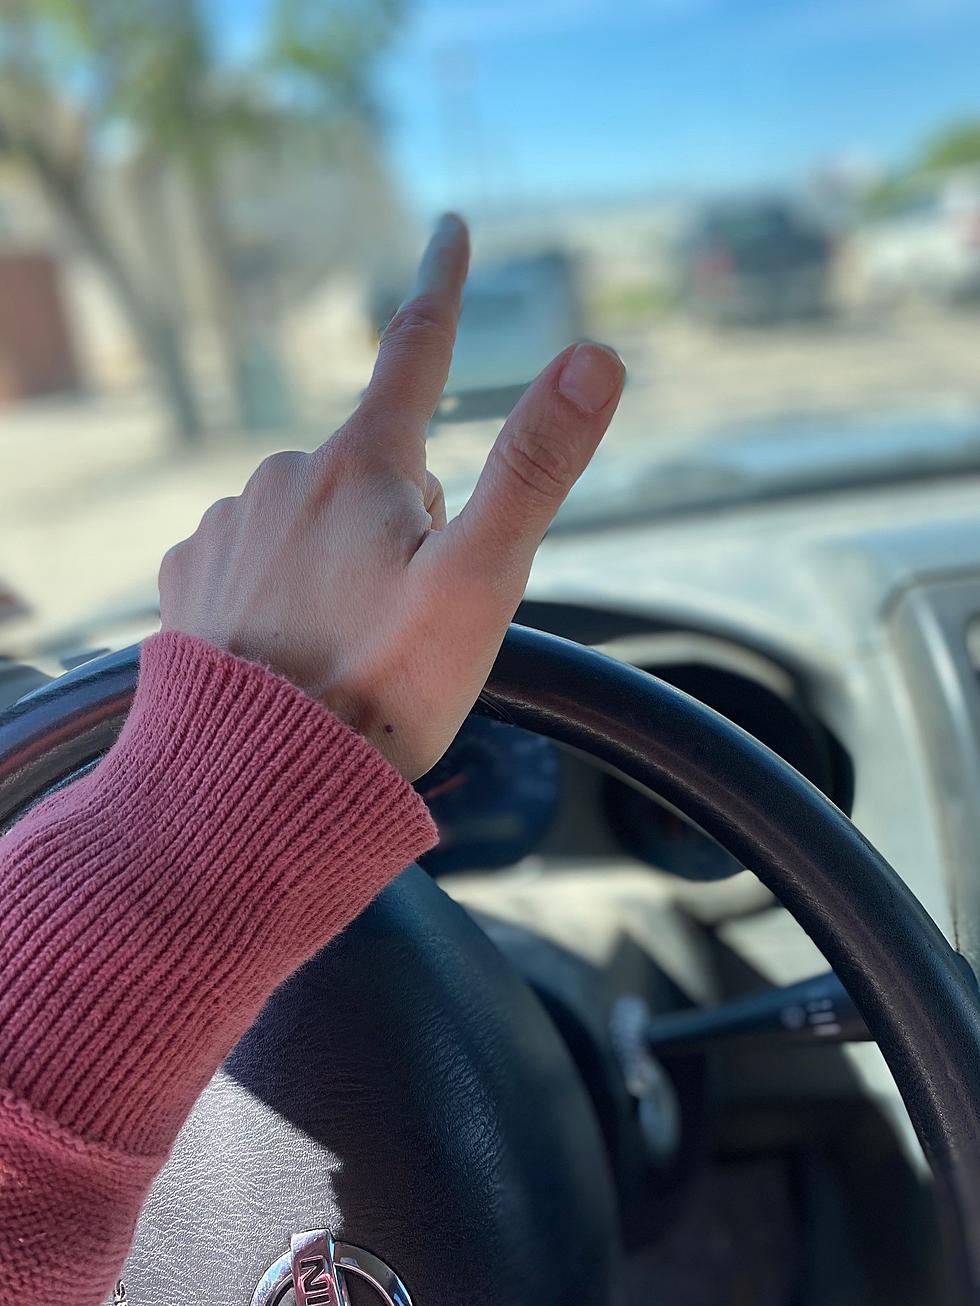 What’s The Right Way To Wave In Wyoming While Driving?